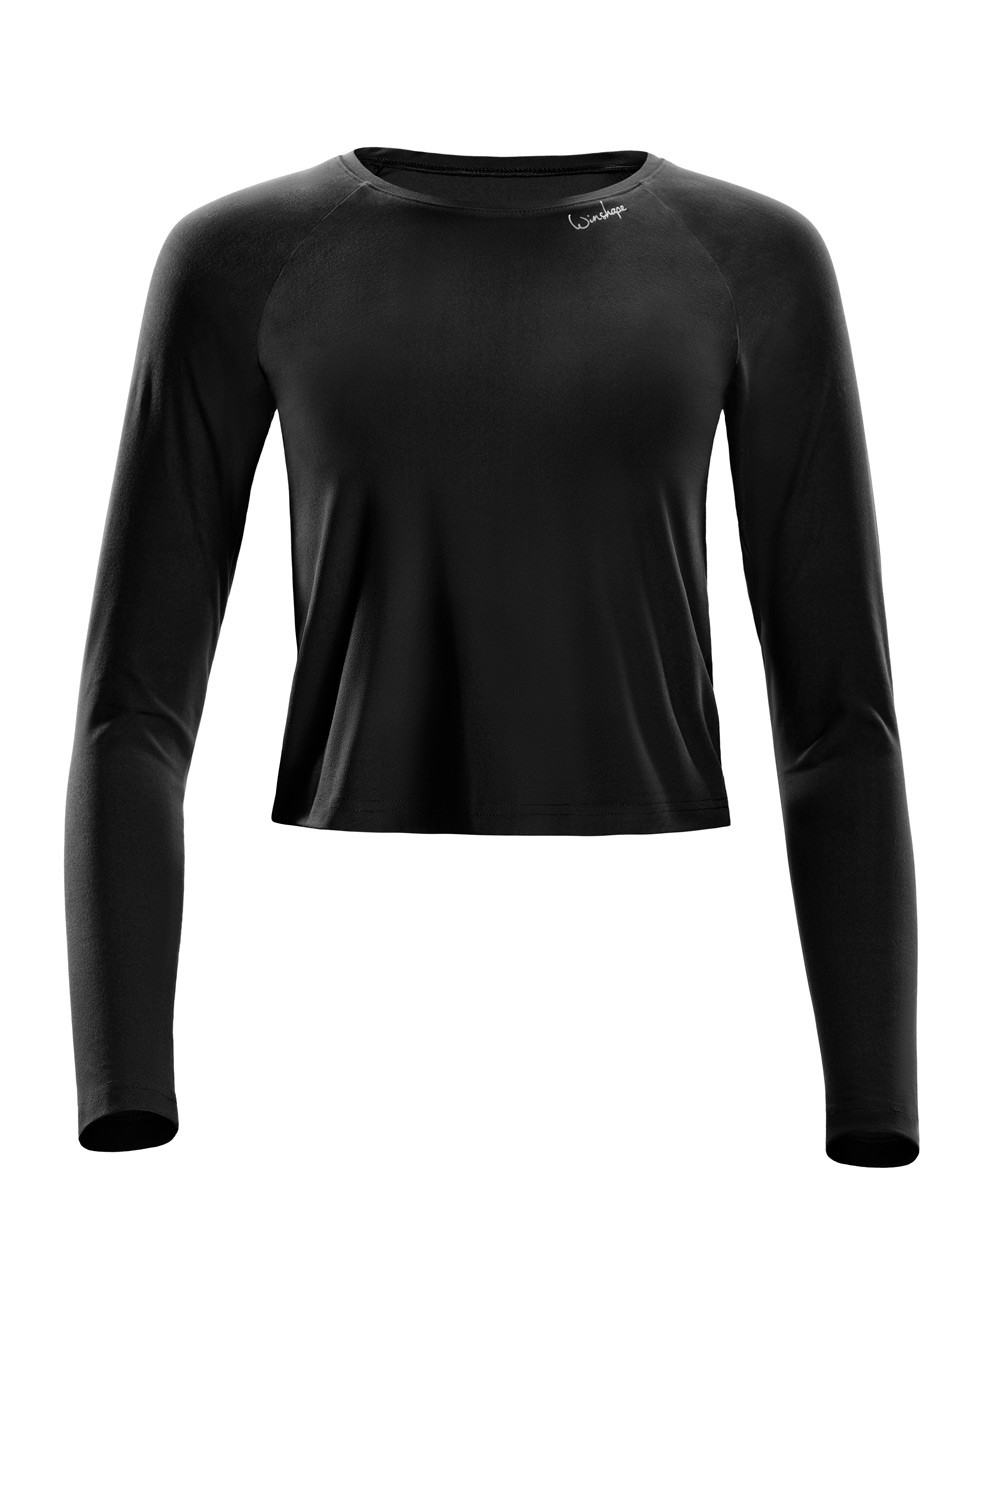 Soft Ultra schwarz, Long Top and Sleeve Winshape Style Soft Functional Cropped Light AET119LS,